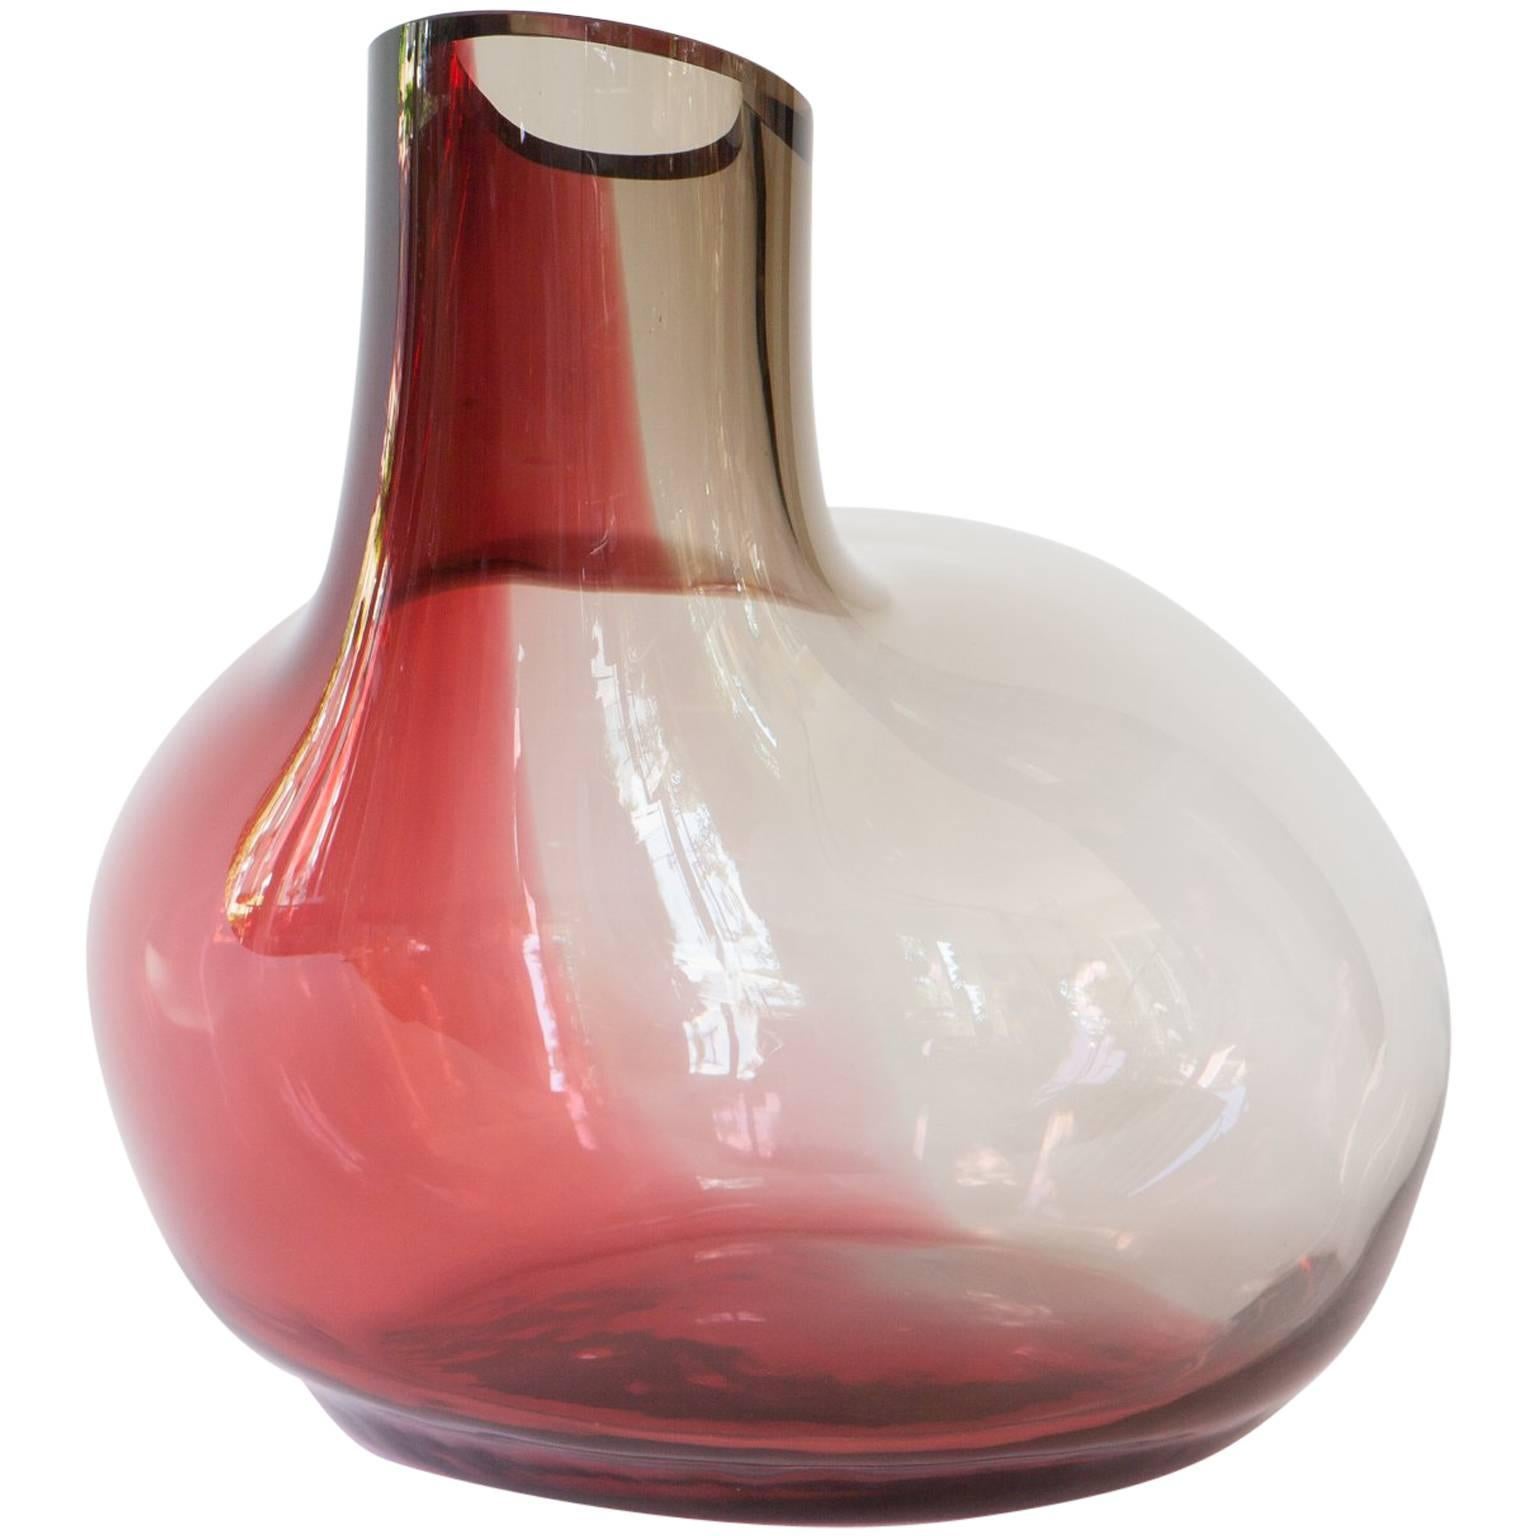 "Big Bird" Red and Grey Large Sculptural Blown Glass Vessel by Utopia & Utility